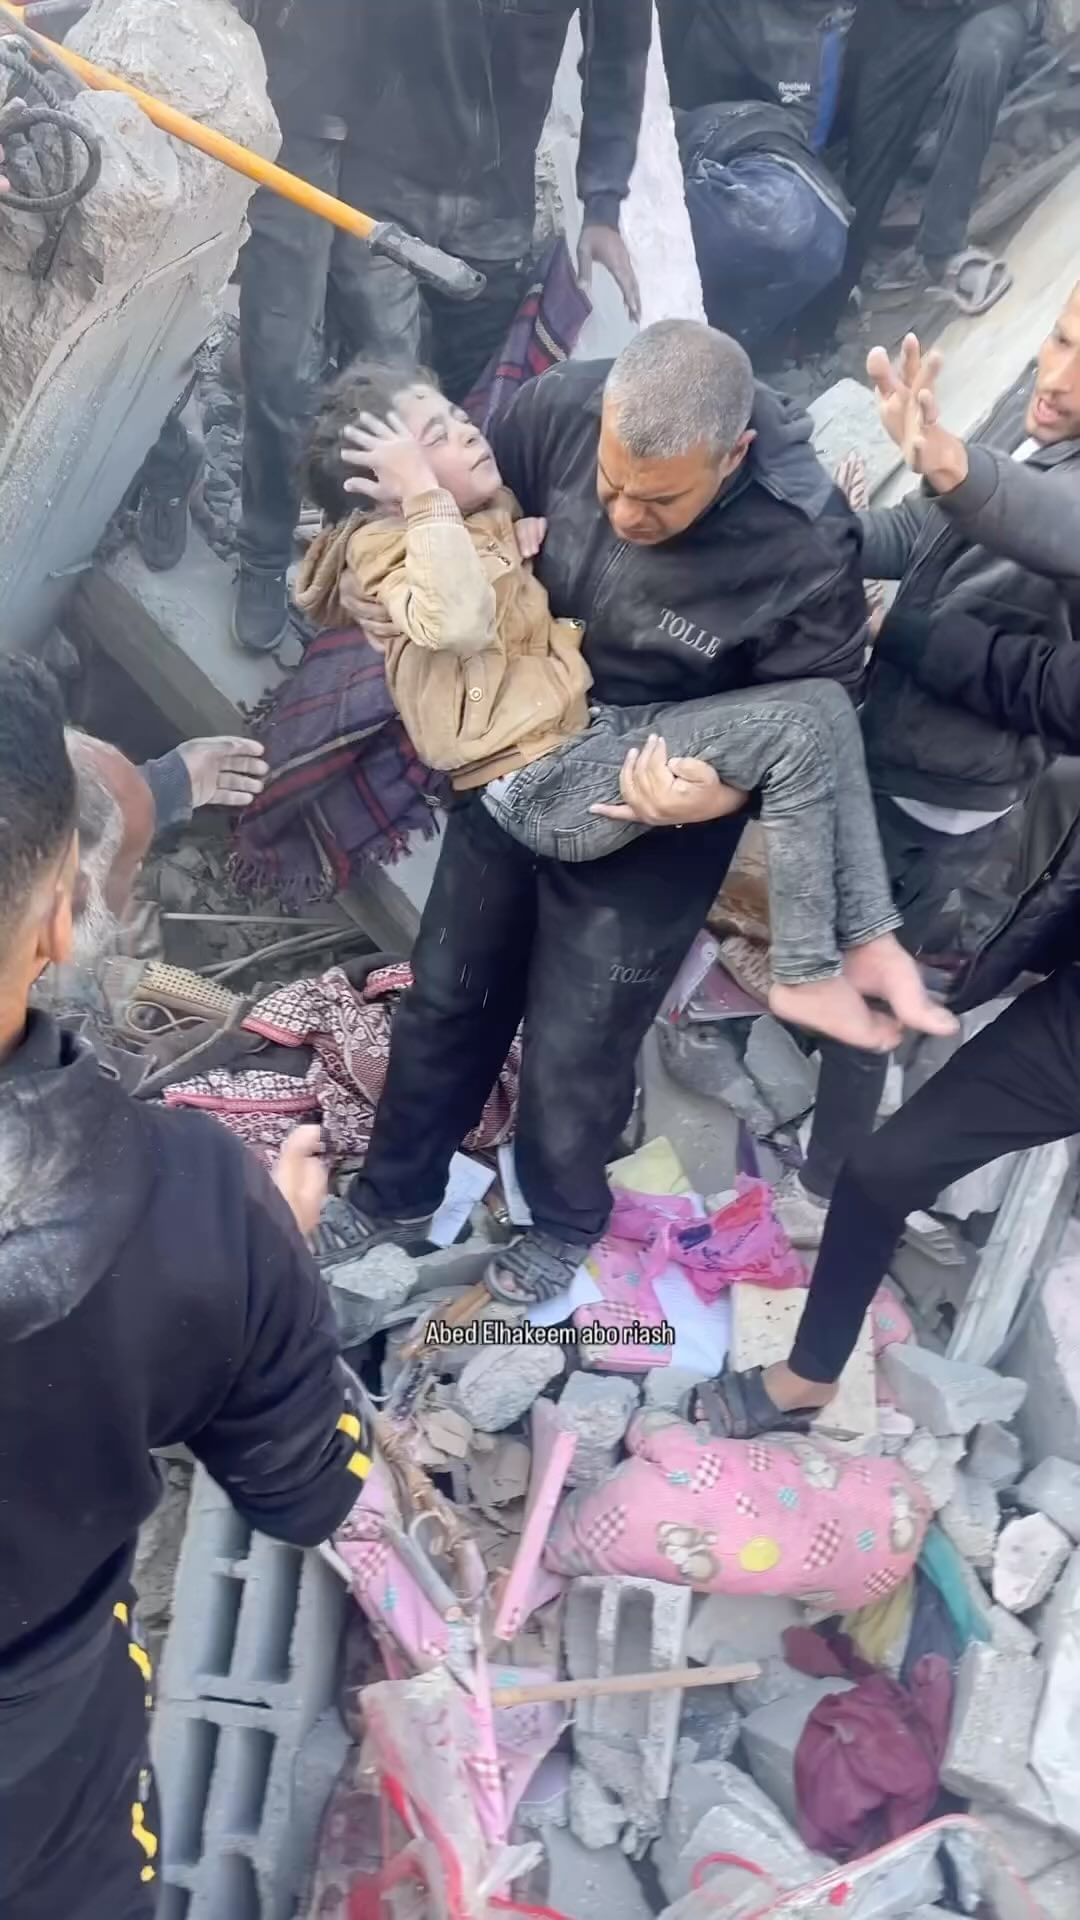 a-child-is-rescued-after-spending-5-hours-under-the-rubble-of-a-destroyed-home-in-gaza-strip.-via-@abdalhkem-abu-riash-
…